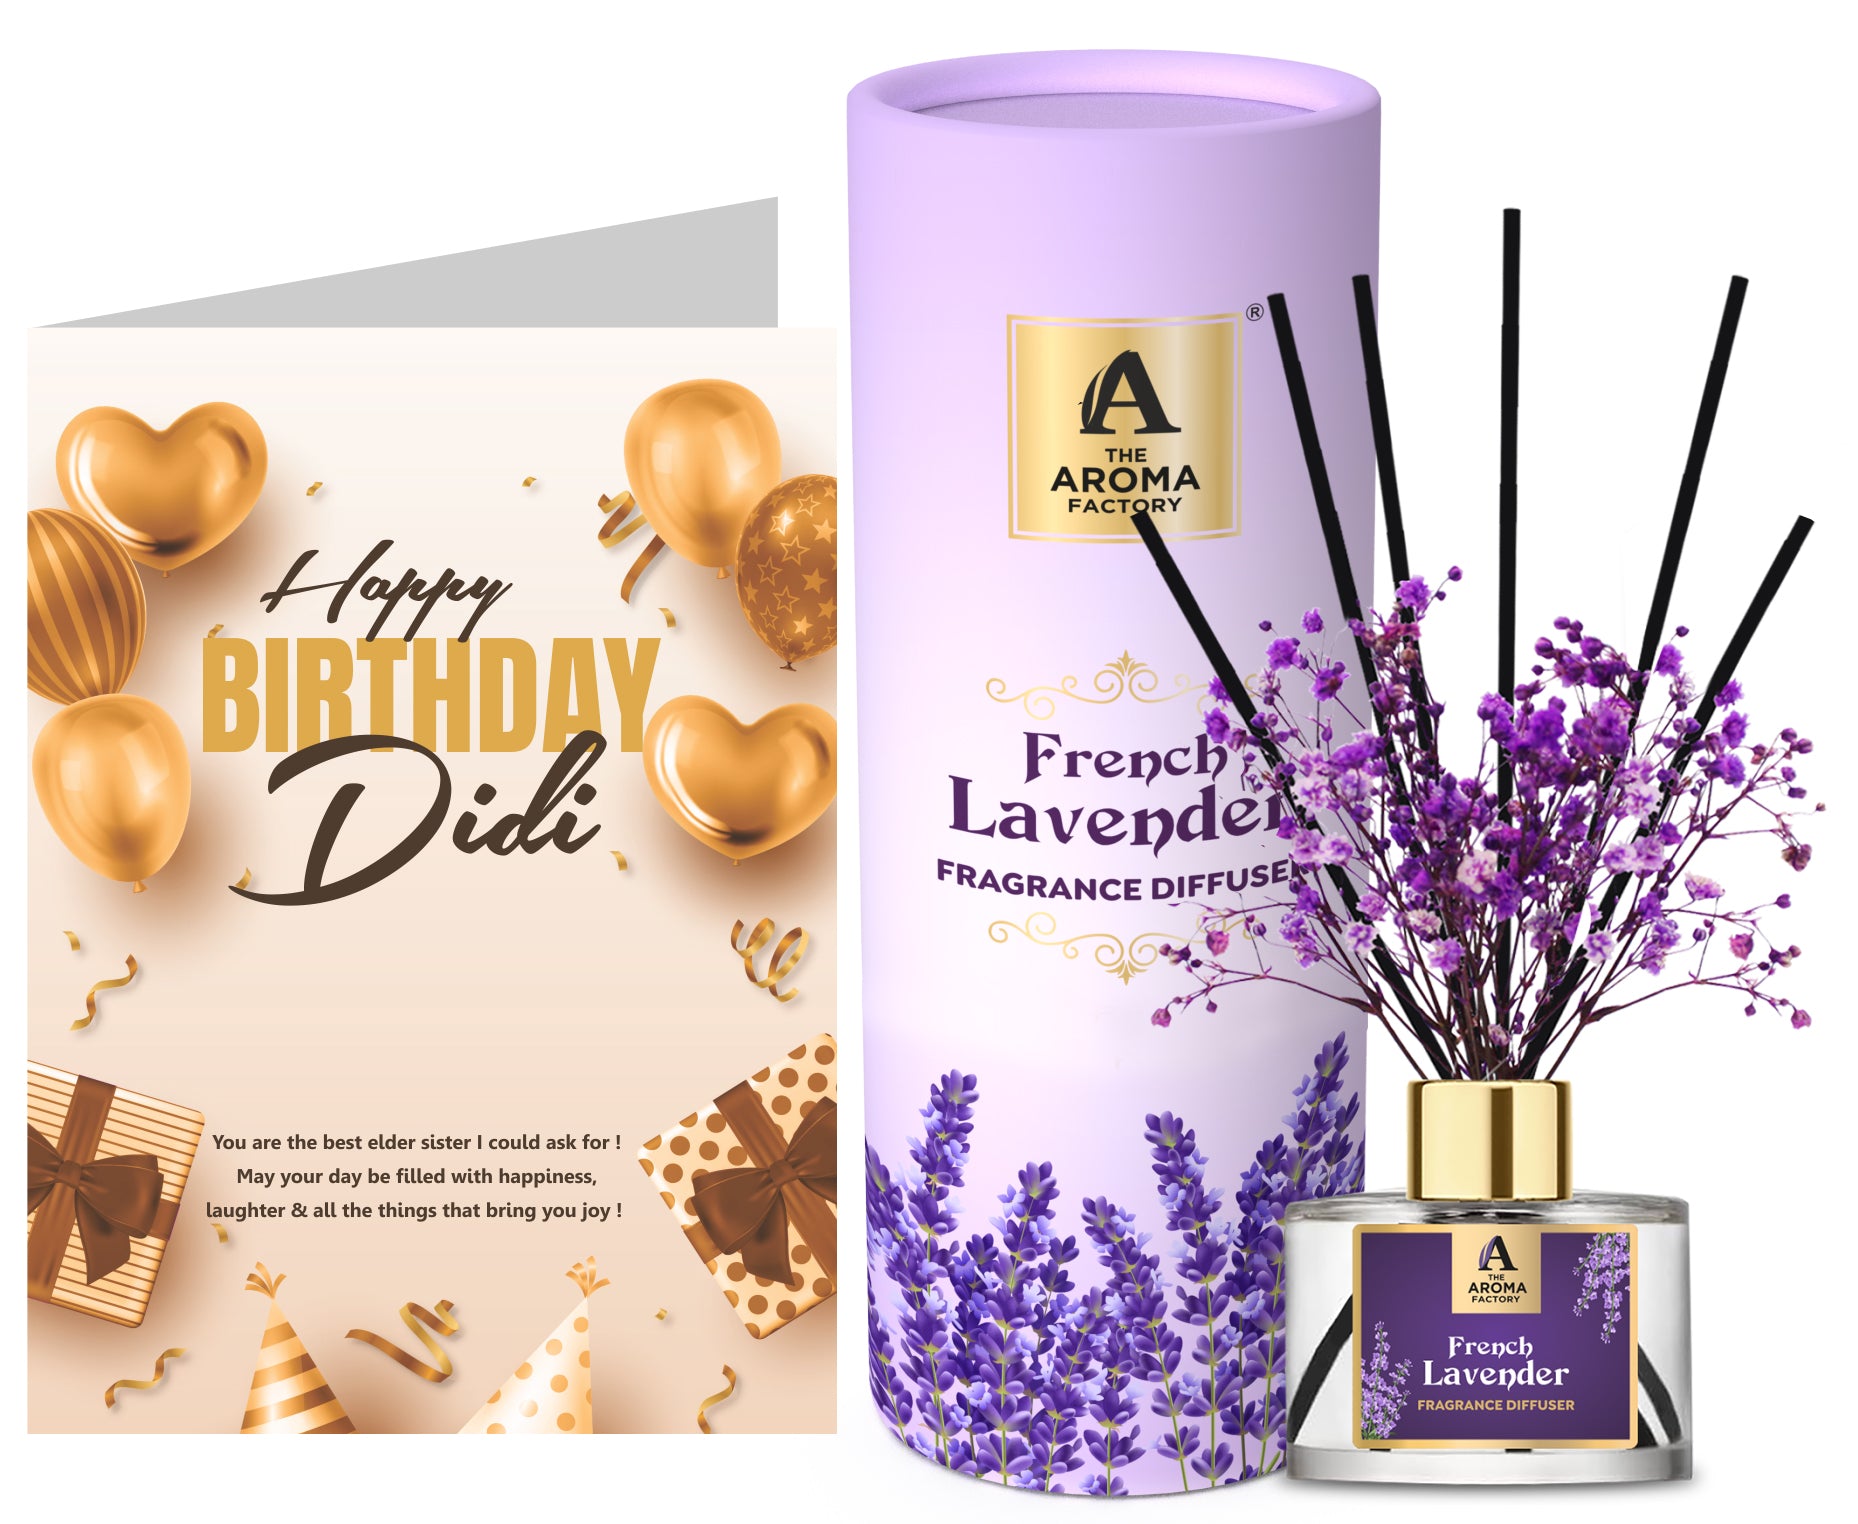 The Aroma Factory Happy Birthday Gift for Didi/Elder Sister with Card, French Lavender Fragrance Reed Diffuser Set (1 Box + 1 Card)